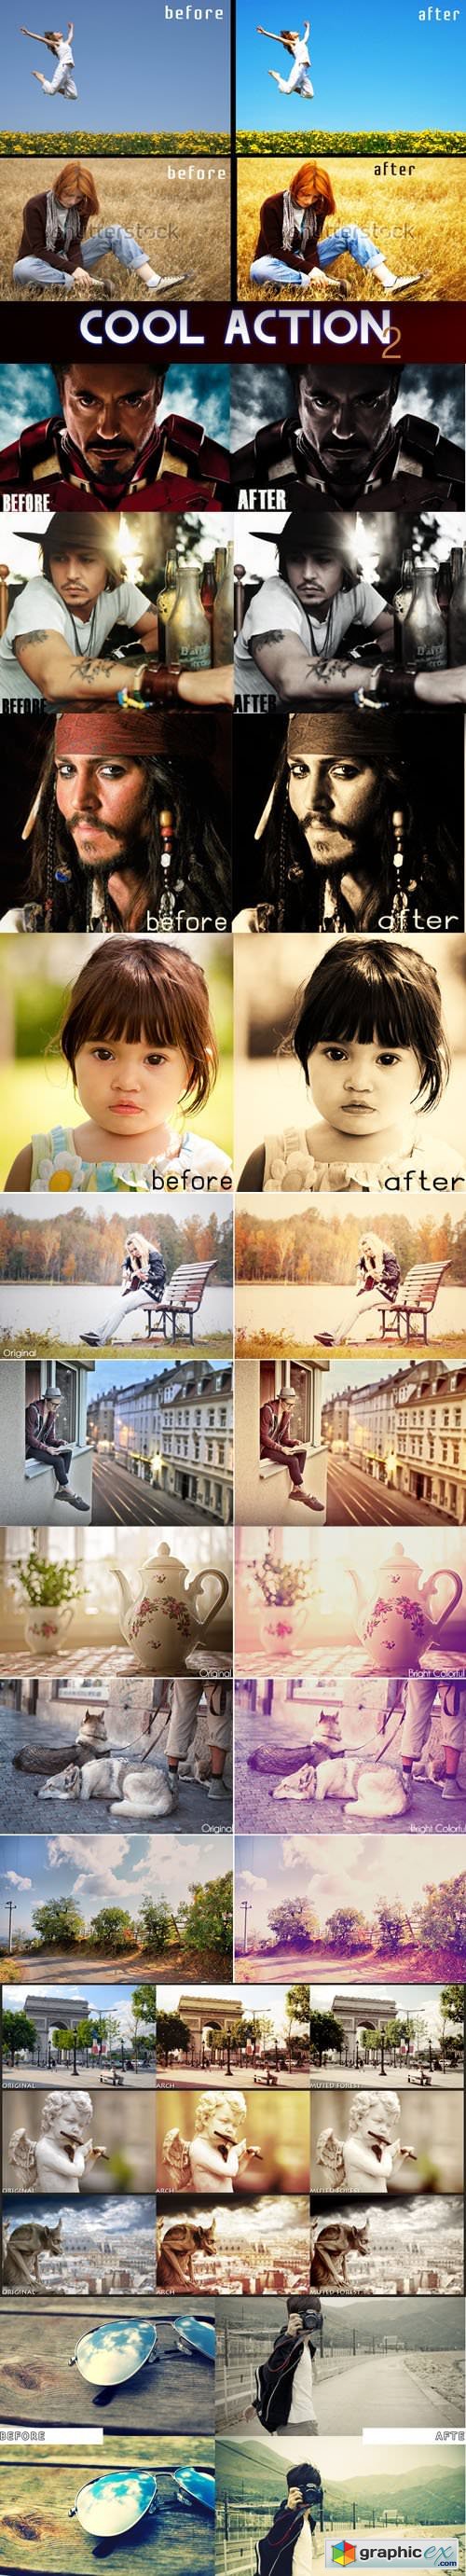 7 Awesome Packs of Photoshop Actions